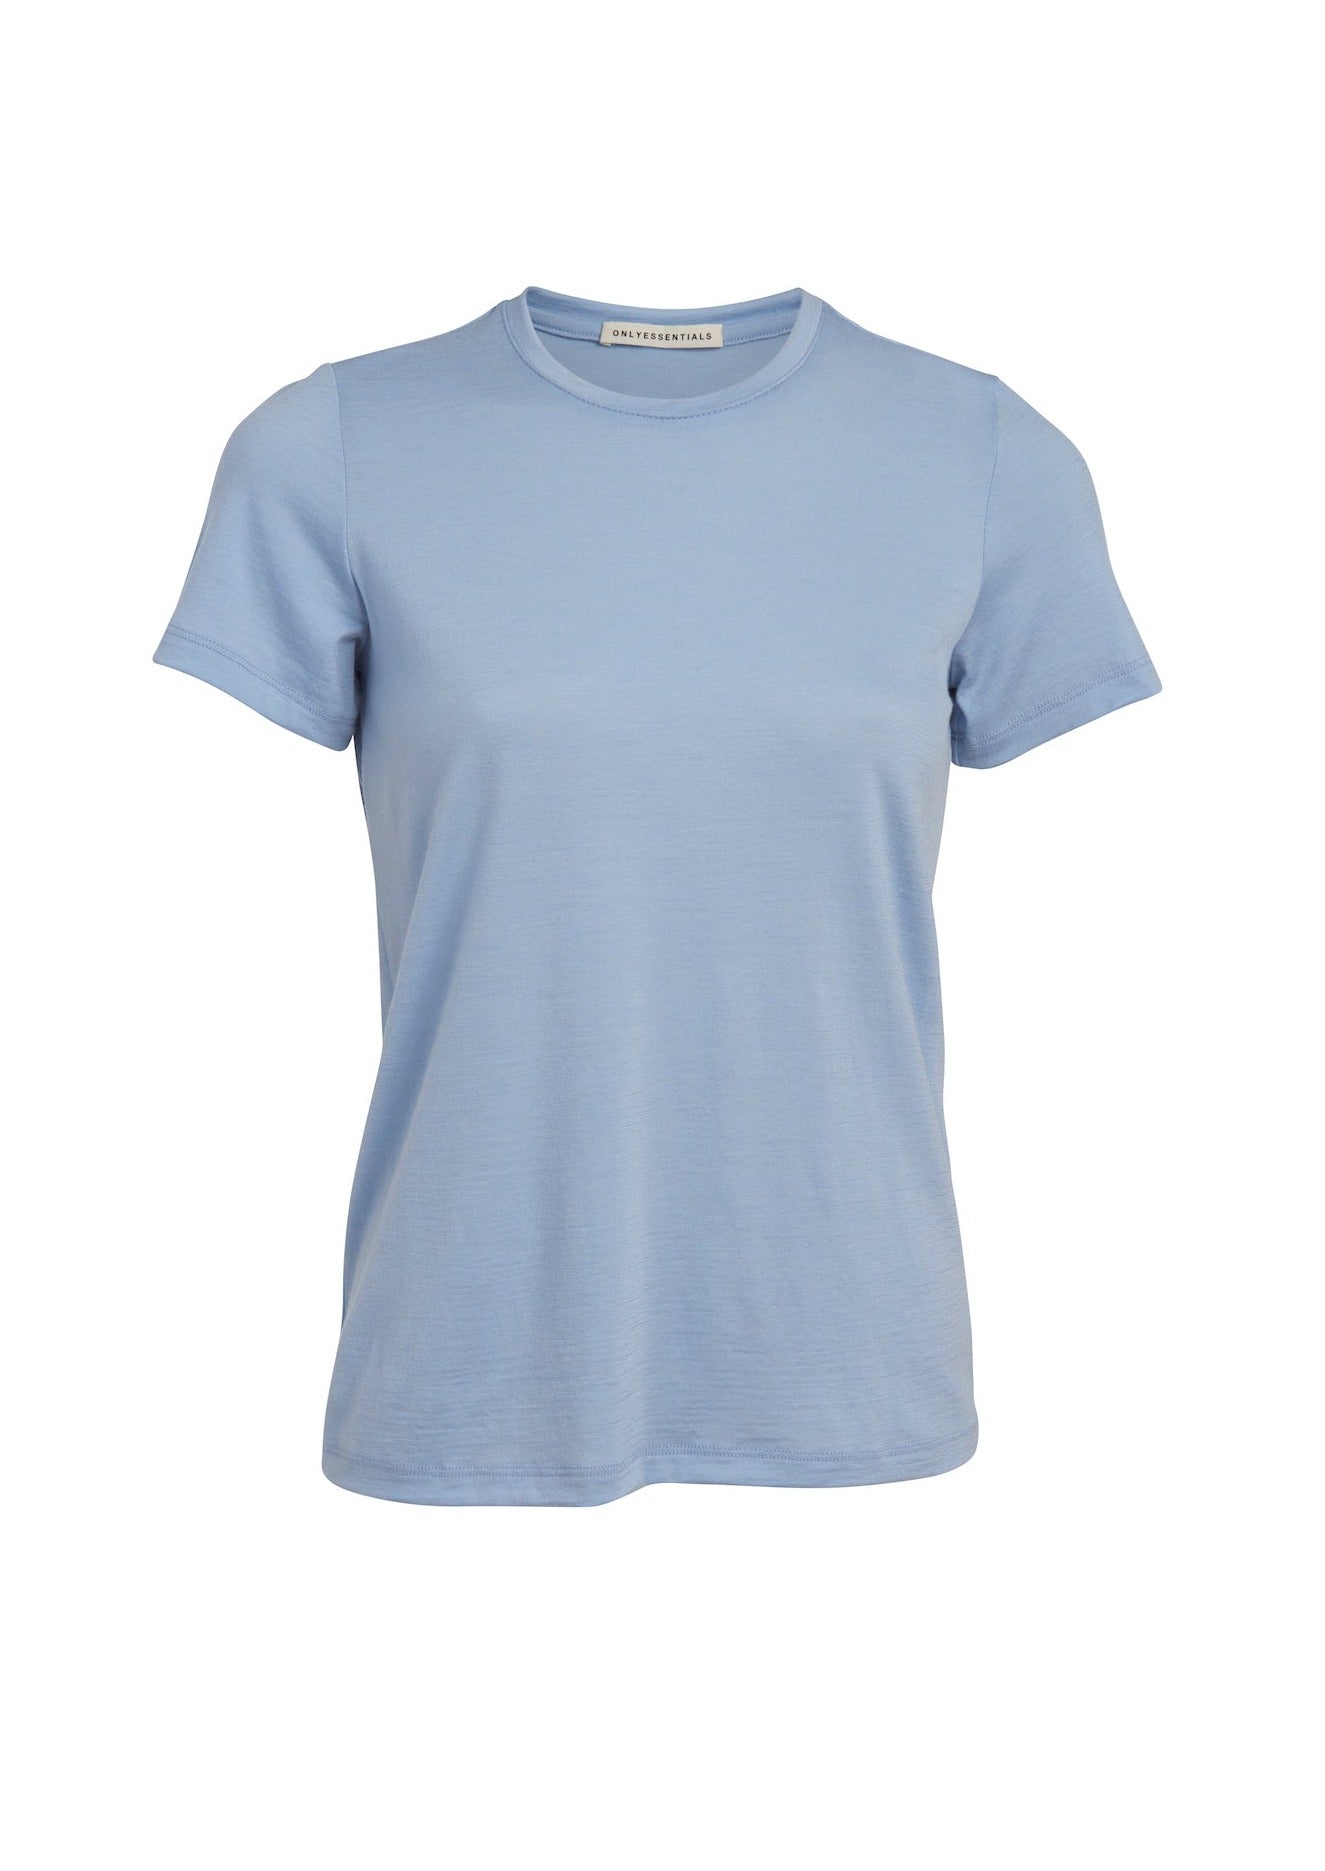 Our classic t-shirt made in New Zealand from ethical wool is soft and breathable and designed to wear all seasons.